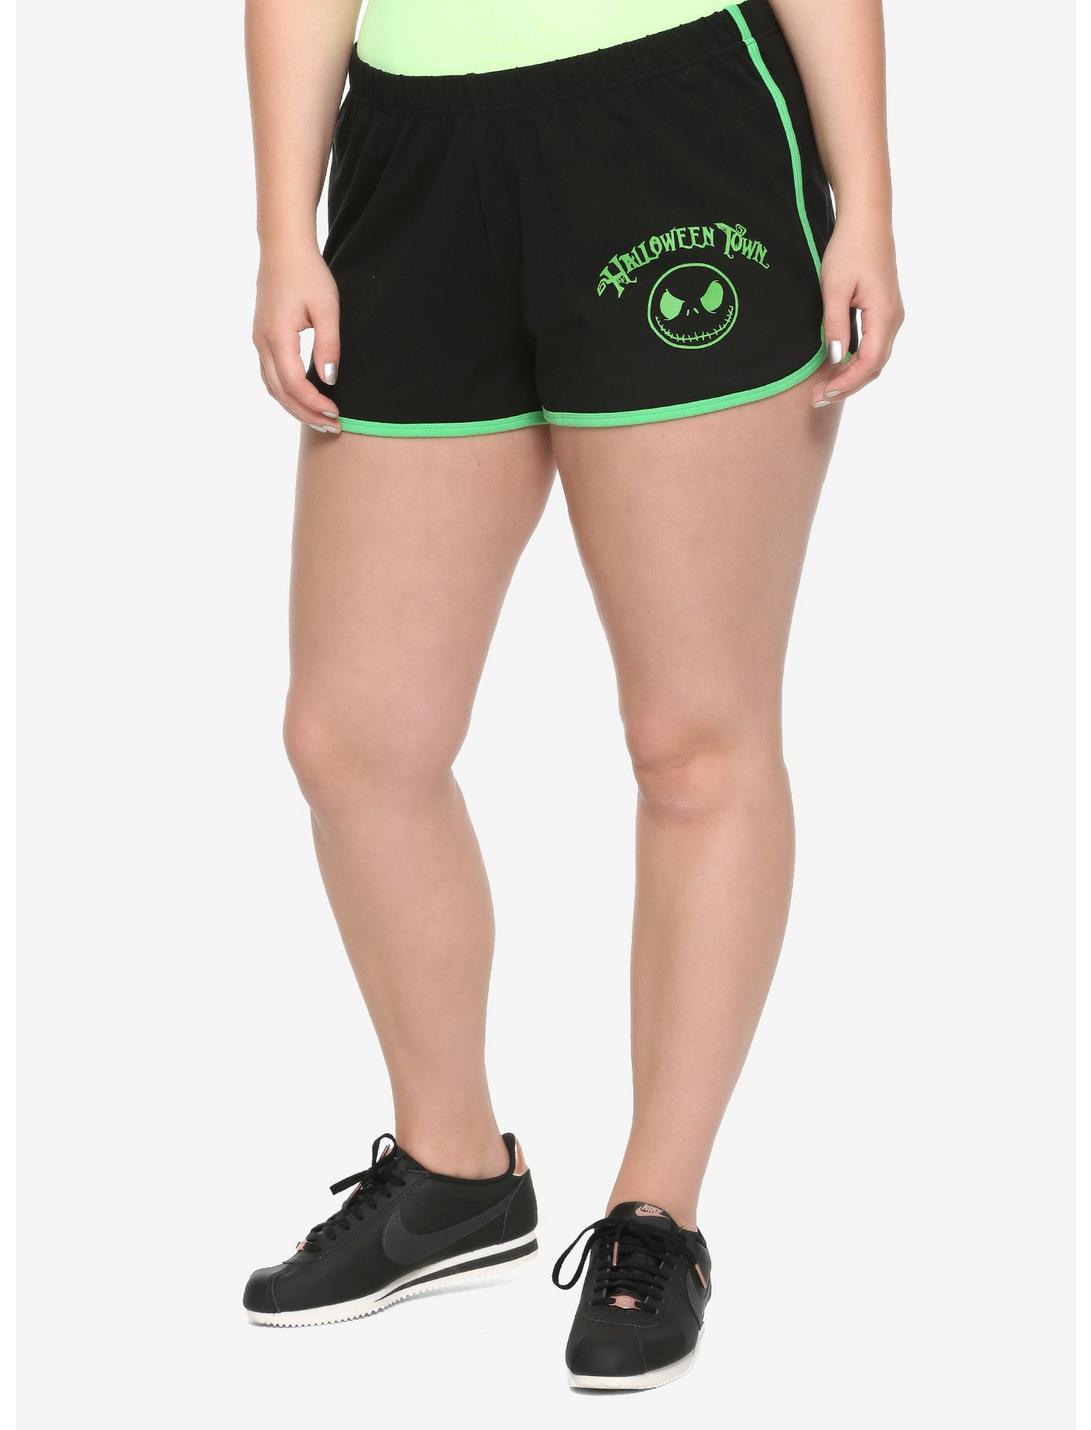 The Nightmare Before Christmas Halloween Town Girls Soft Shorts Plus Size, MULTI, hi-res